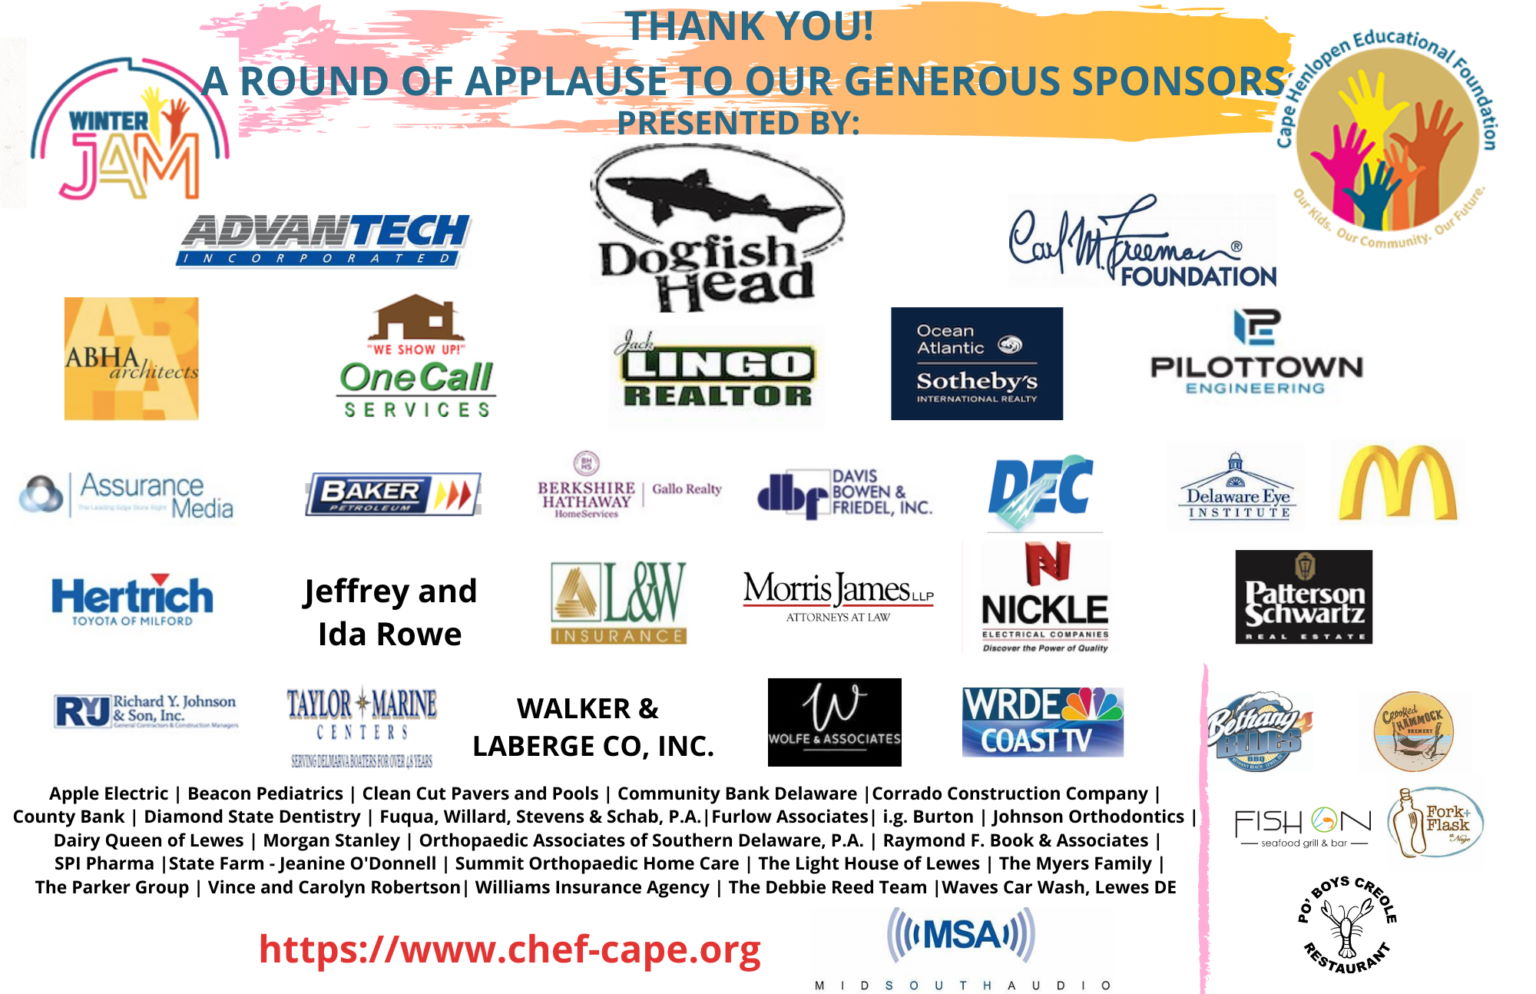 THANK-YOU-A-ROUND-OF-APPLAUSE-TO-OUR-GENEROUS-SPONSORS-1536x994